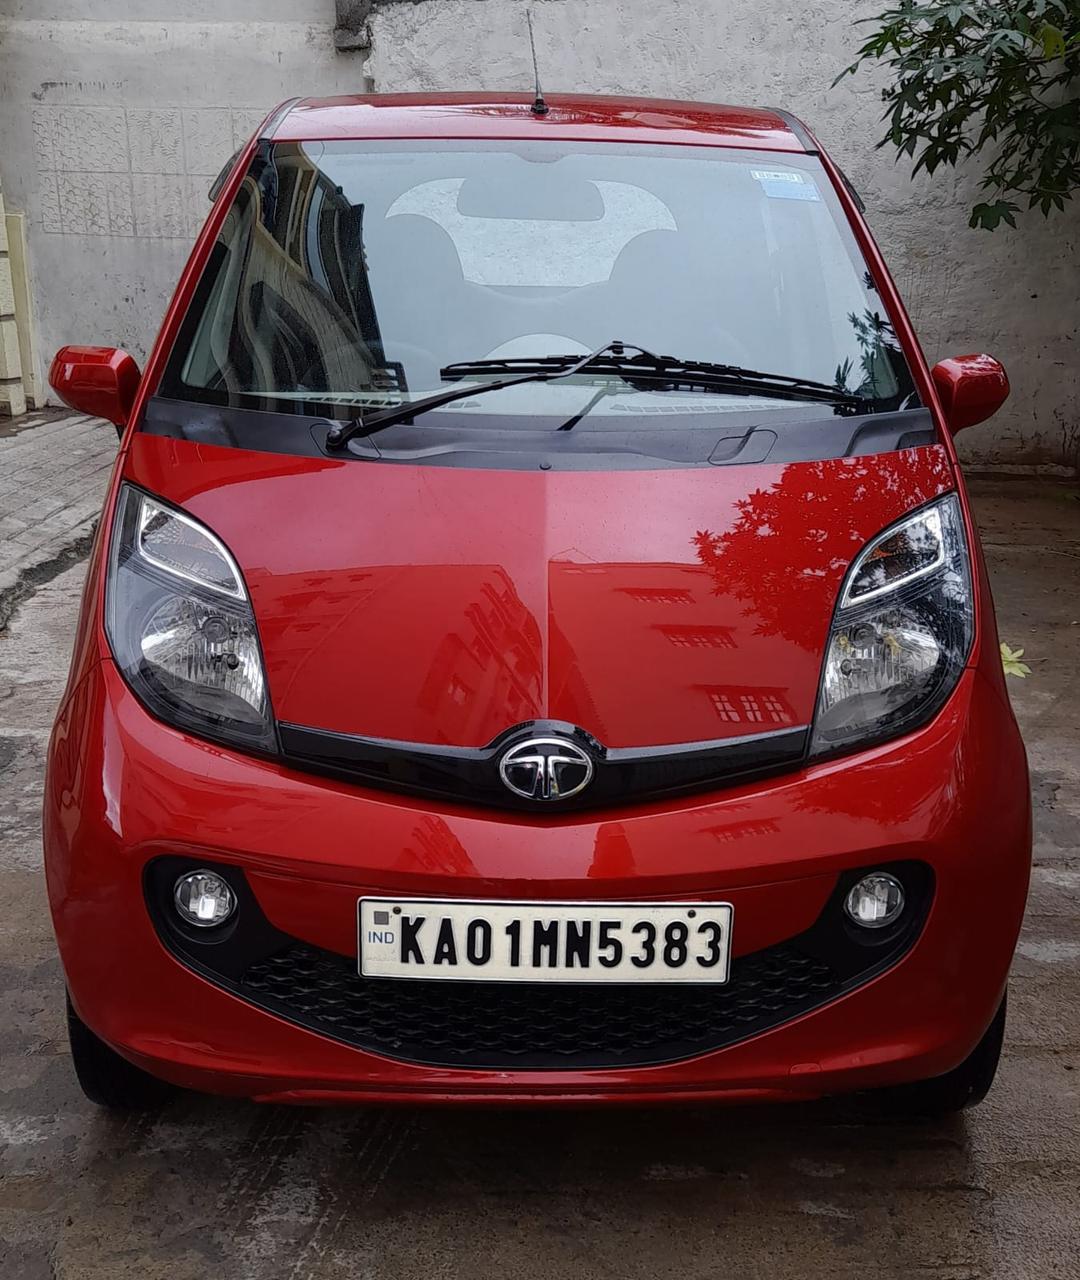 2016 Tata Nano XTA (Automatic) 42k kms, Single Owner, HSRP fitted.